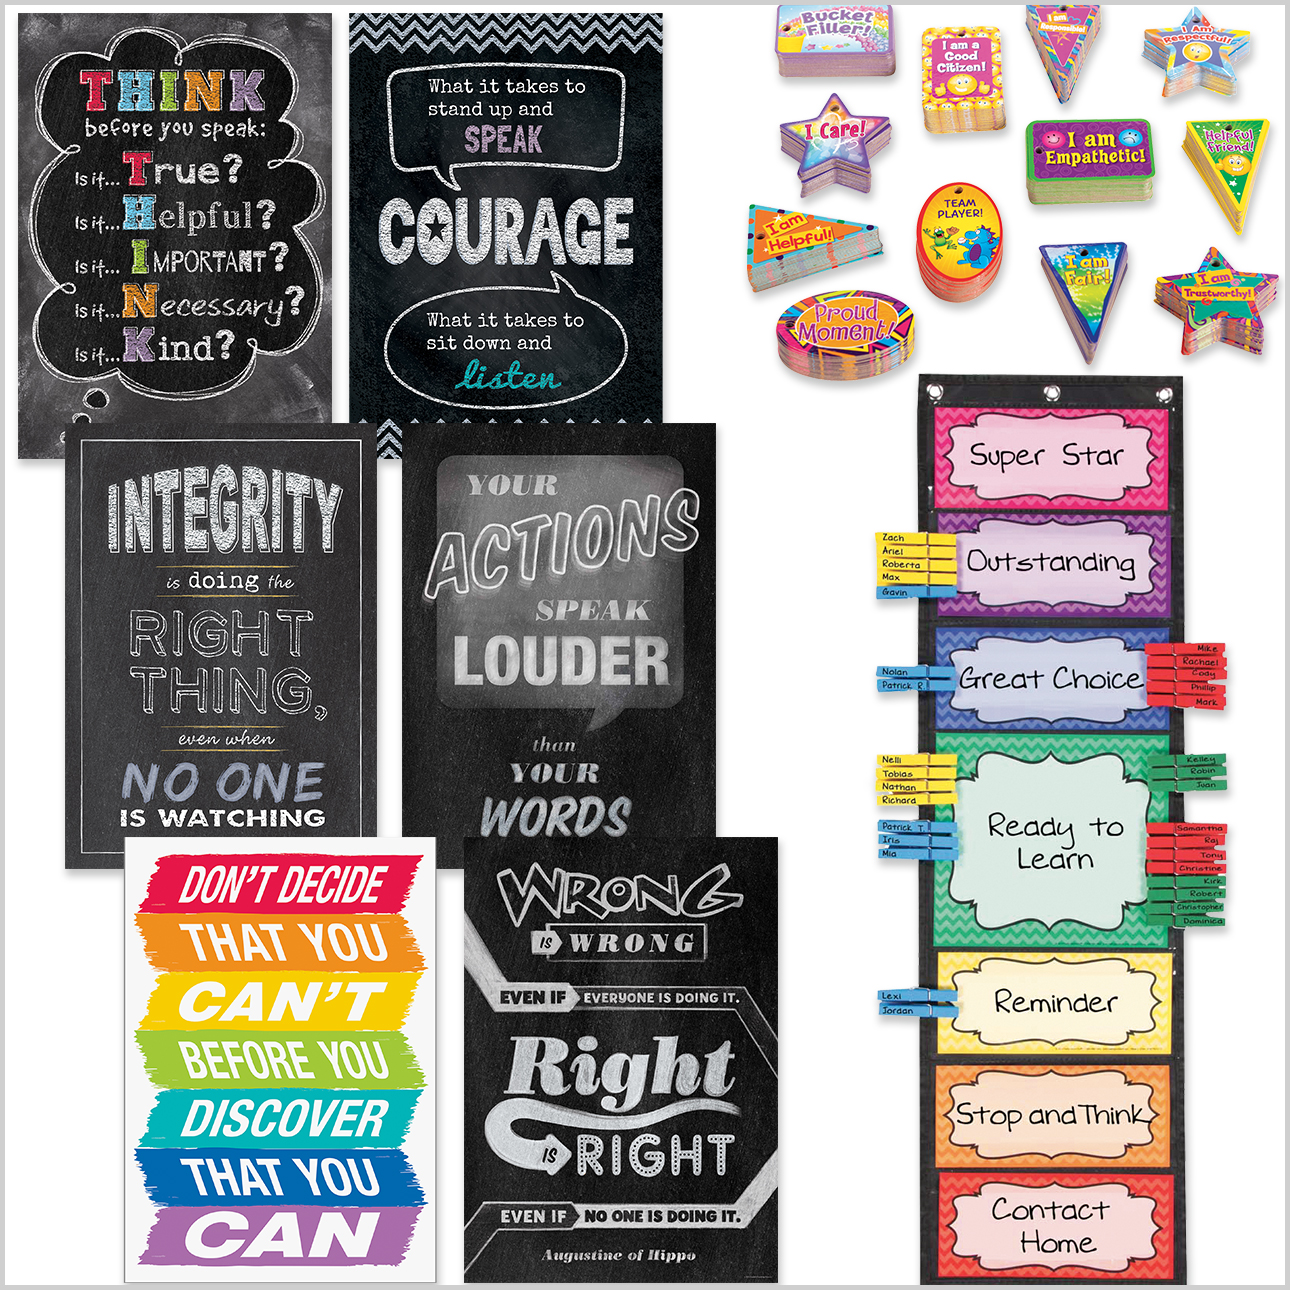 Pride badges on a game my younger sister frequents, with labels for your  viewing pleasure. Crossed out ones that I don't feel comfortable  encouraging cringe about. You just know almost anyone who